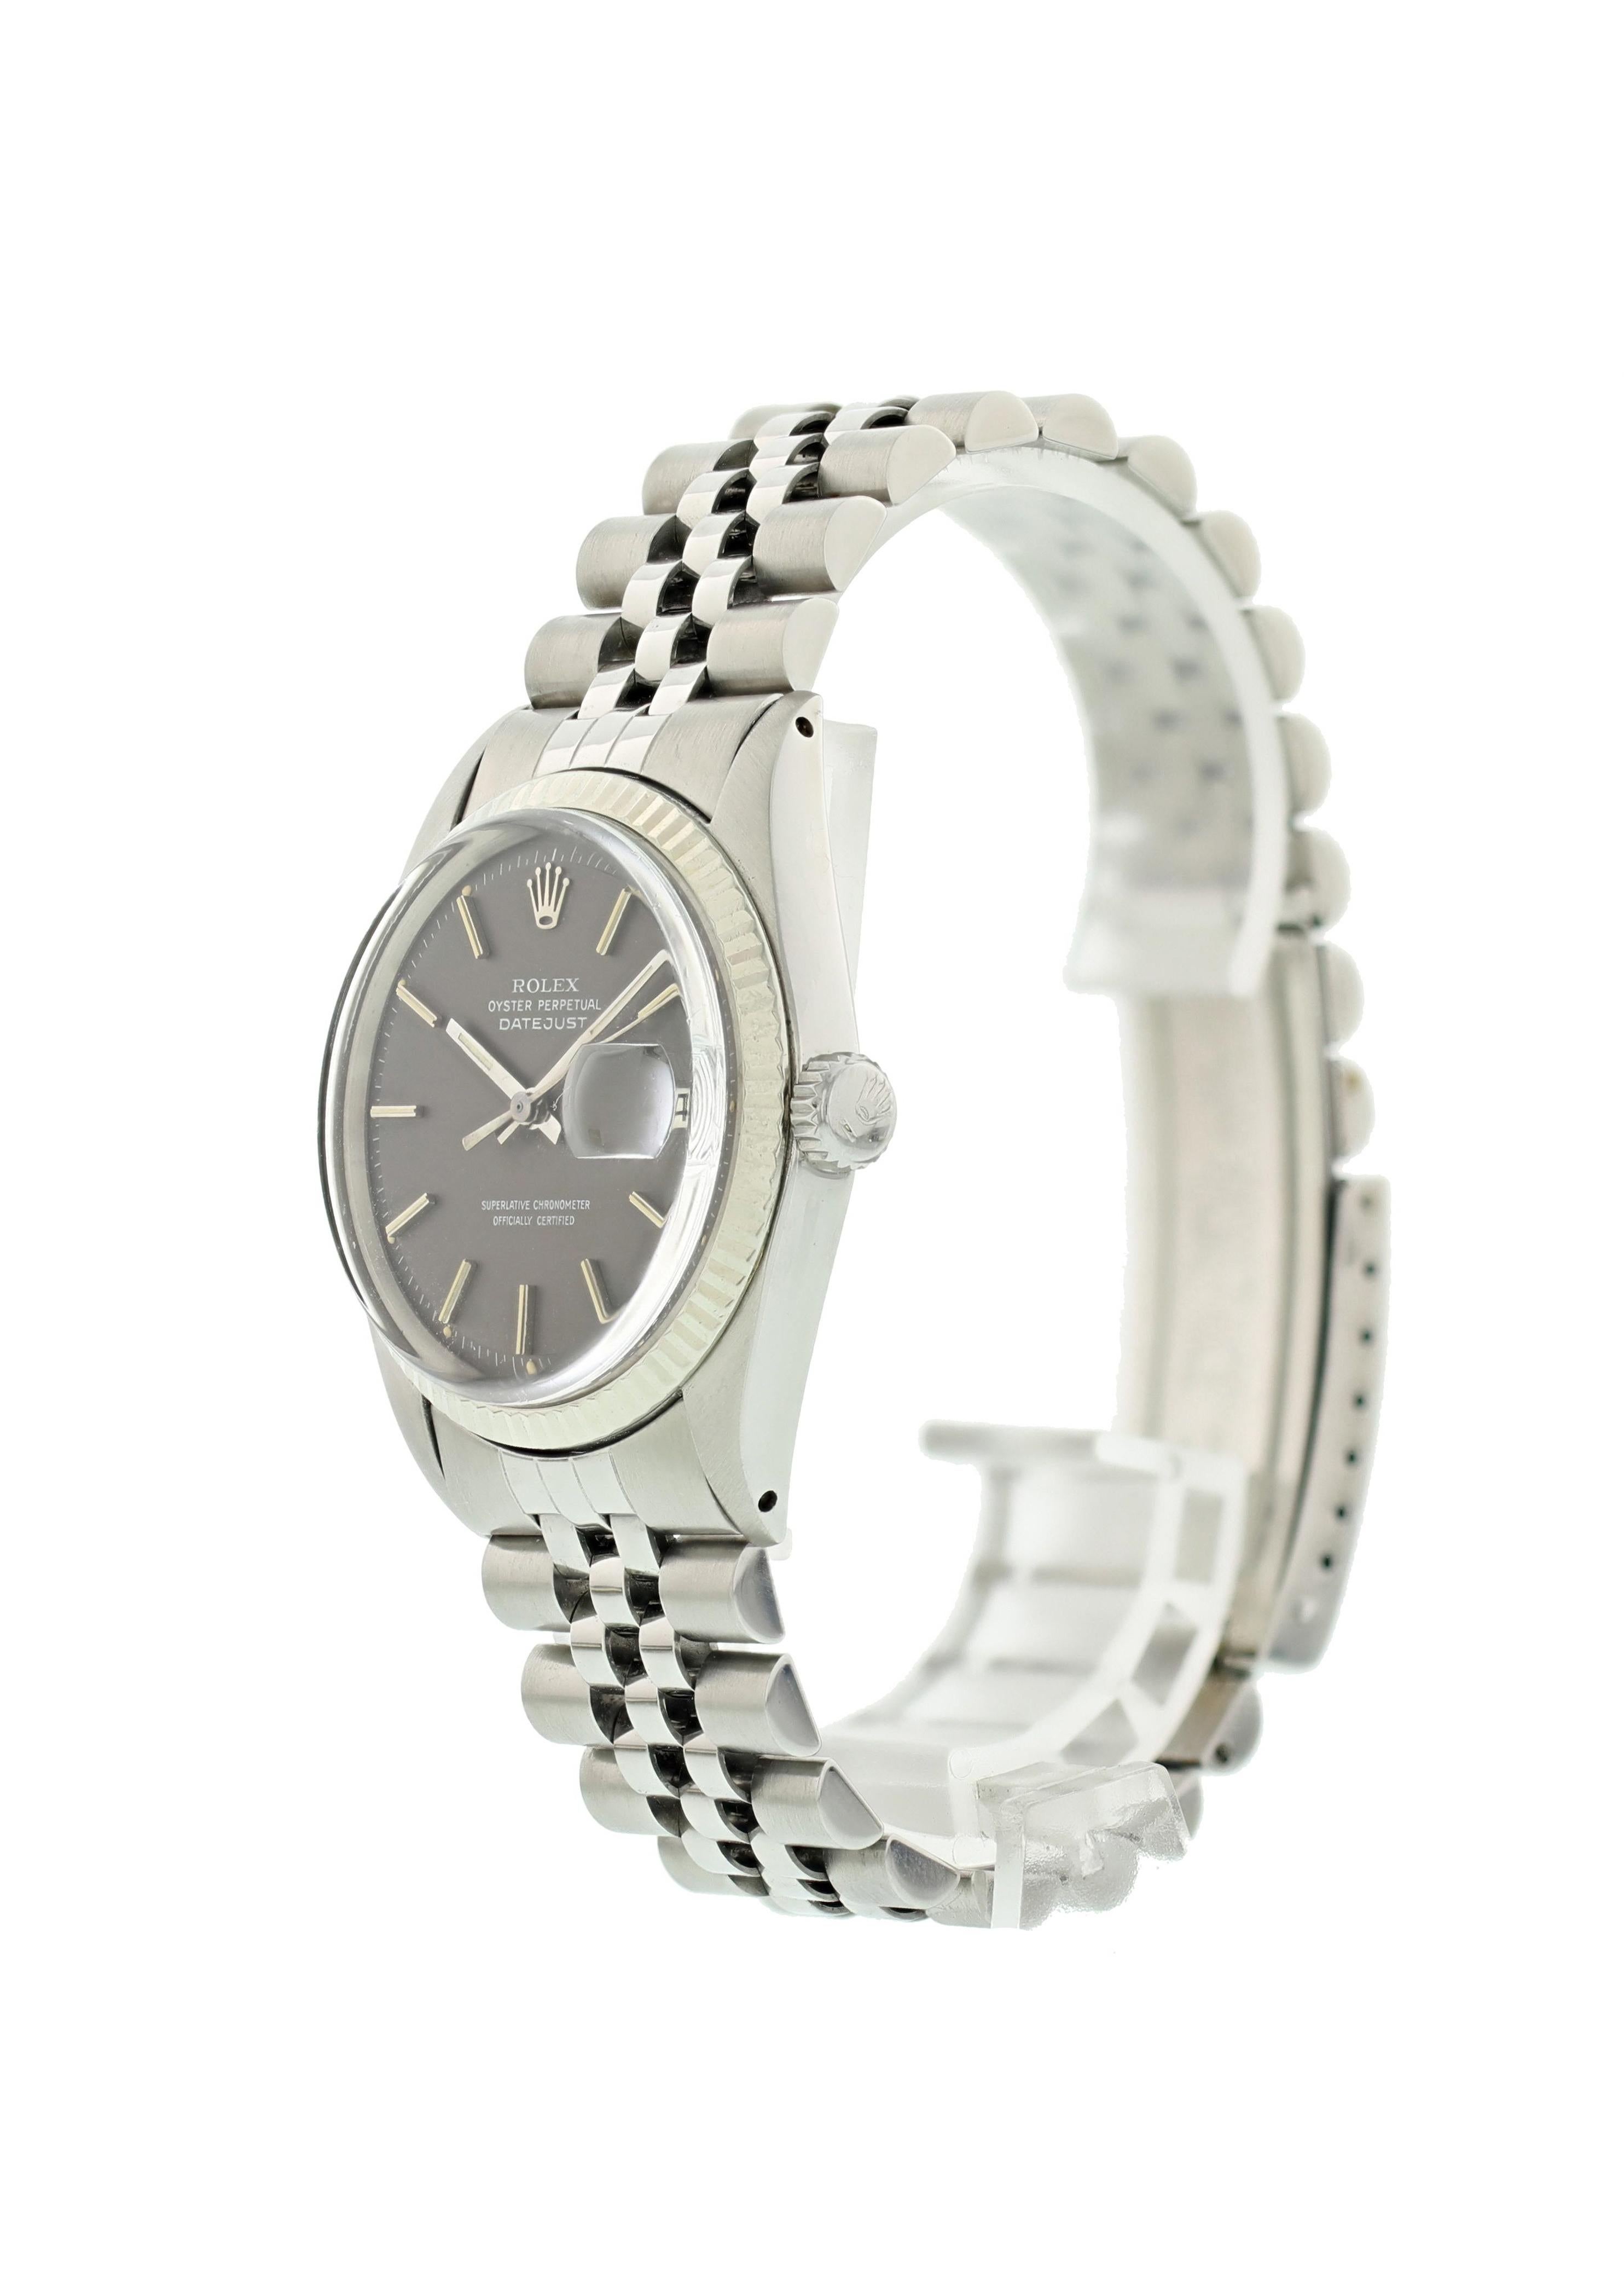 Rolex Oyster Perpetual Datejust 1601 Men's Watch. 36mm Stainless steel case. 18k white gold fluted bezel. Grey dial with steel hands and indexes hour markers. Date display at the 3 o'clock position. Stainless steel jubilee Bracelet with a fold over